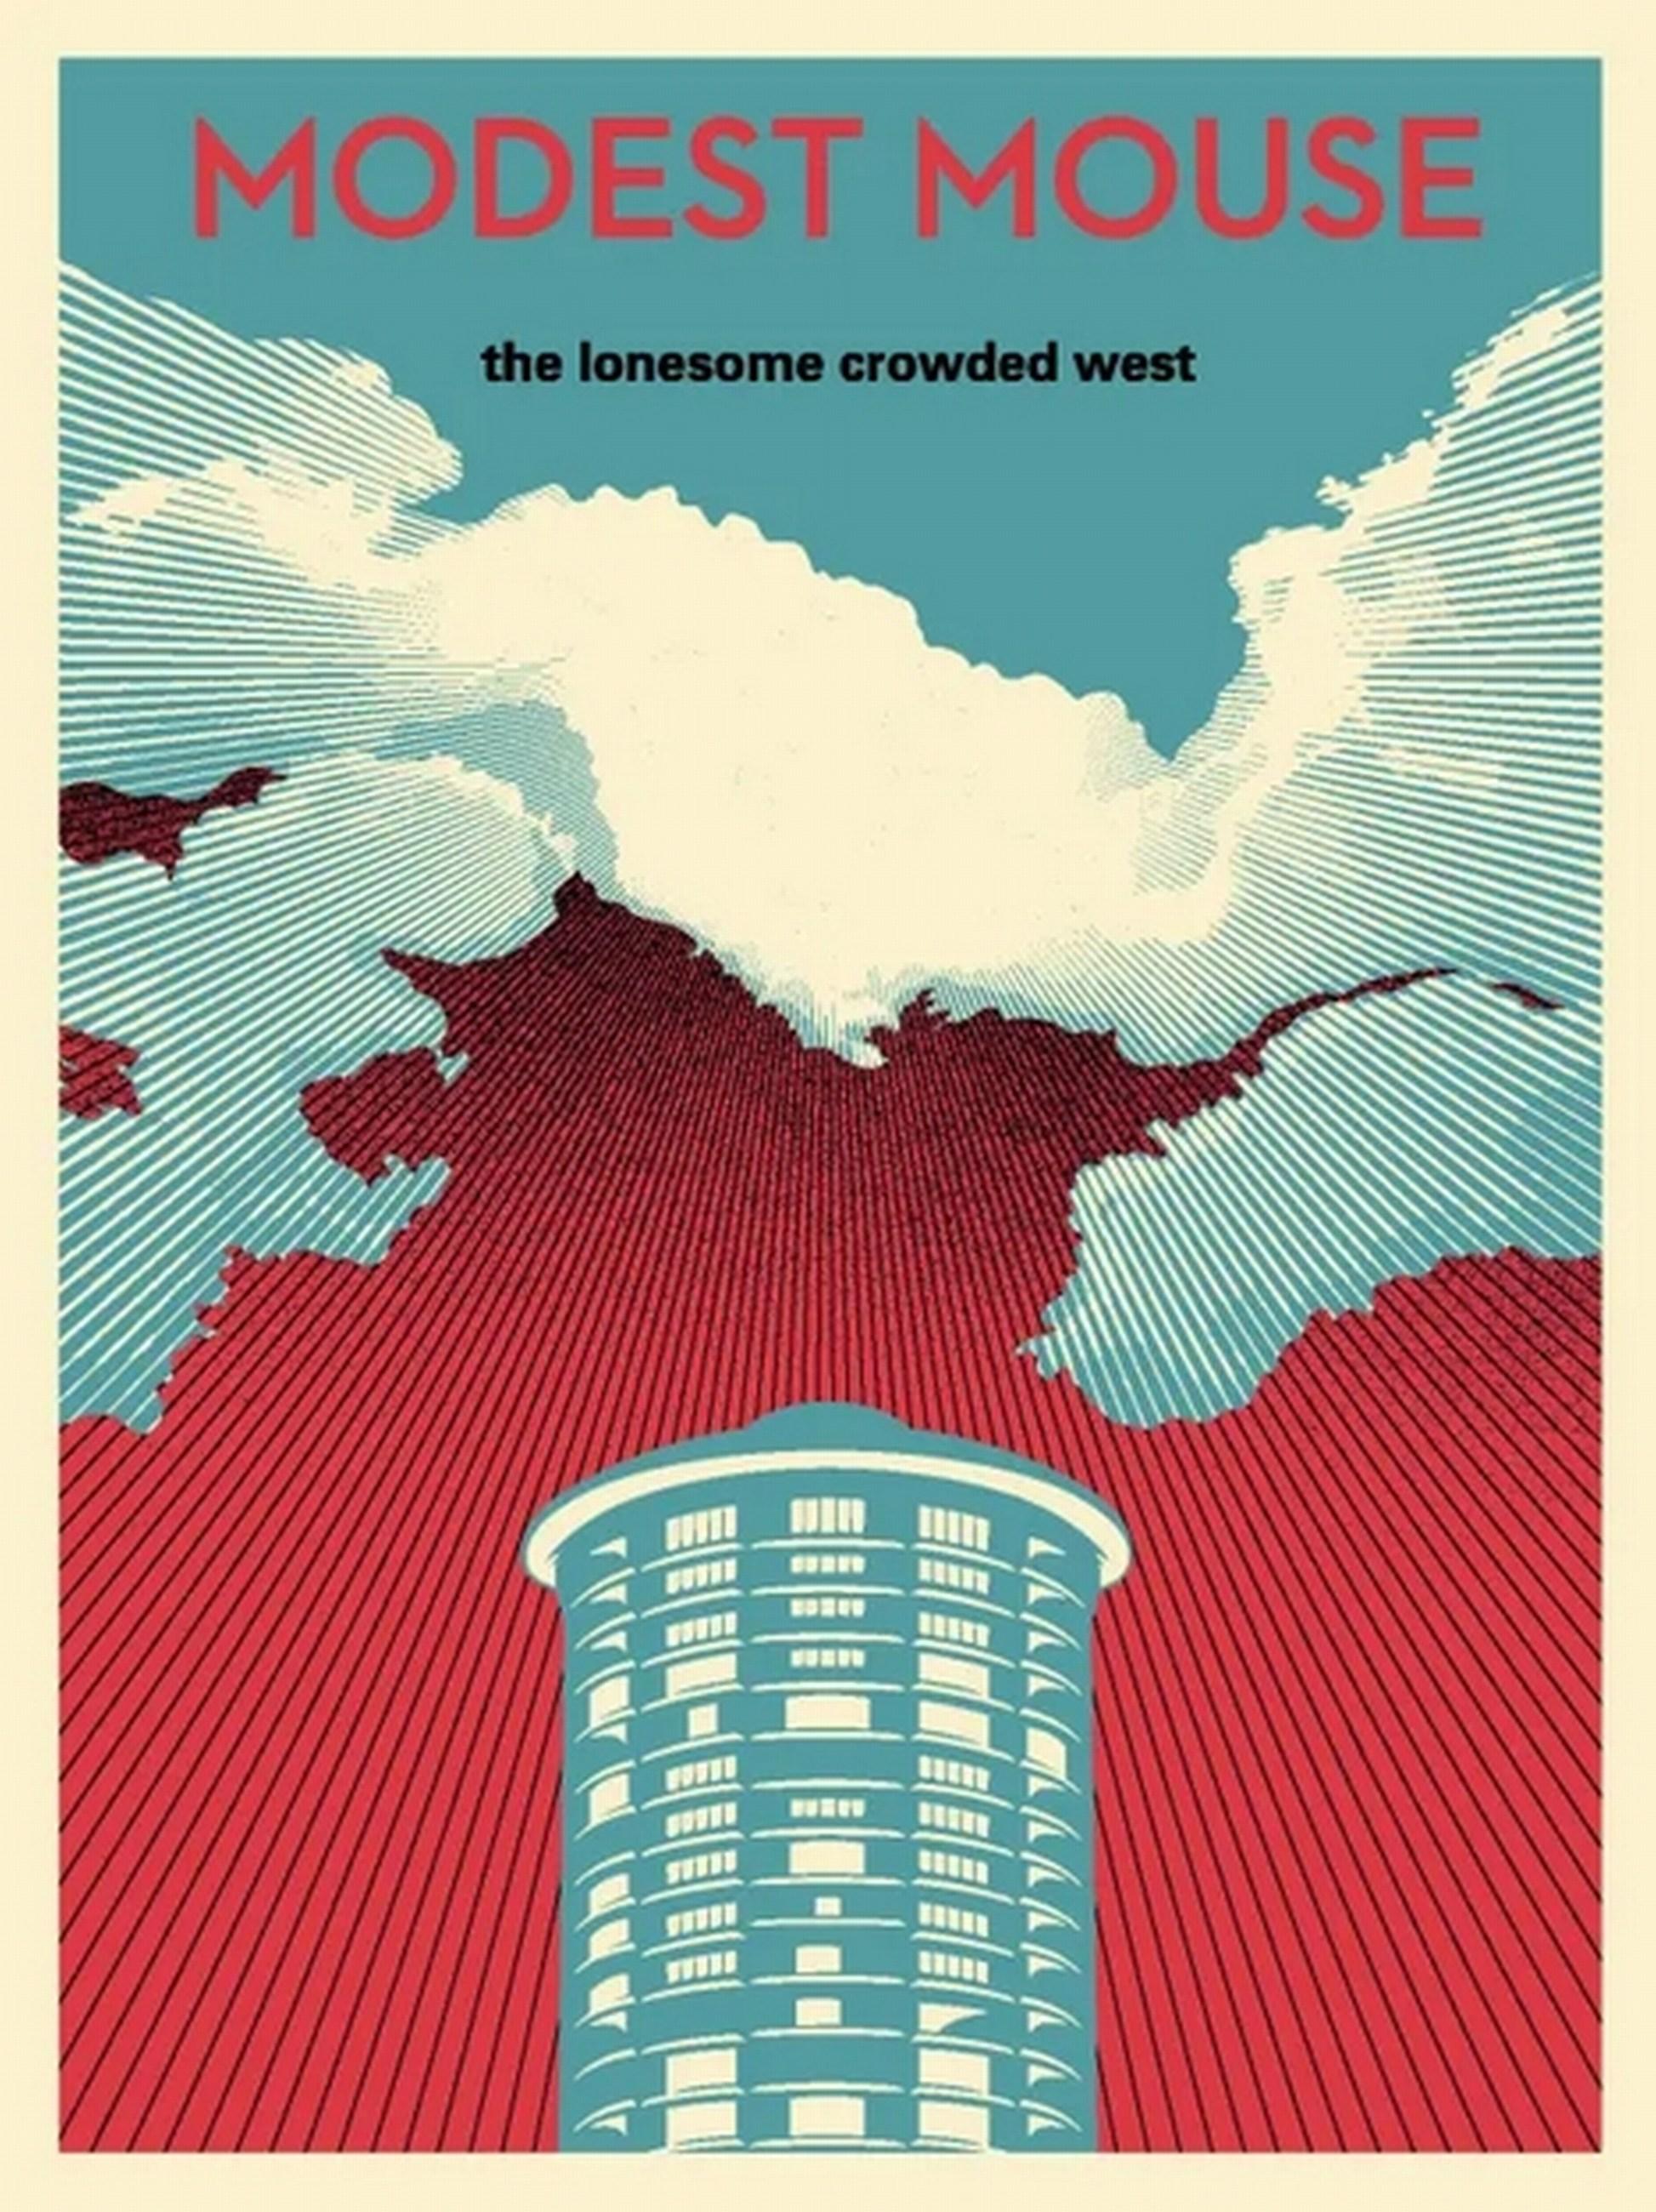 Shepard Fairey Figurative Print - The Lonesome Crowded West Tower (Iconic, Modest Mouse, Isaac Brock)